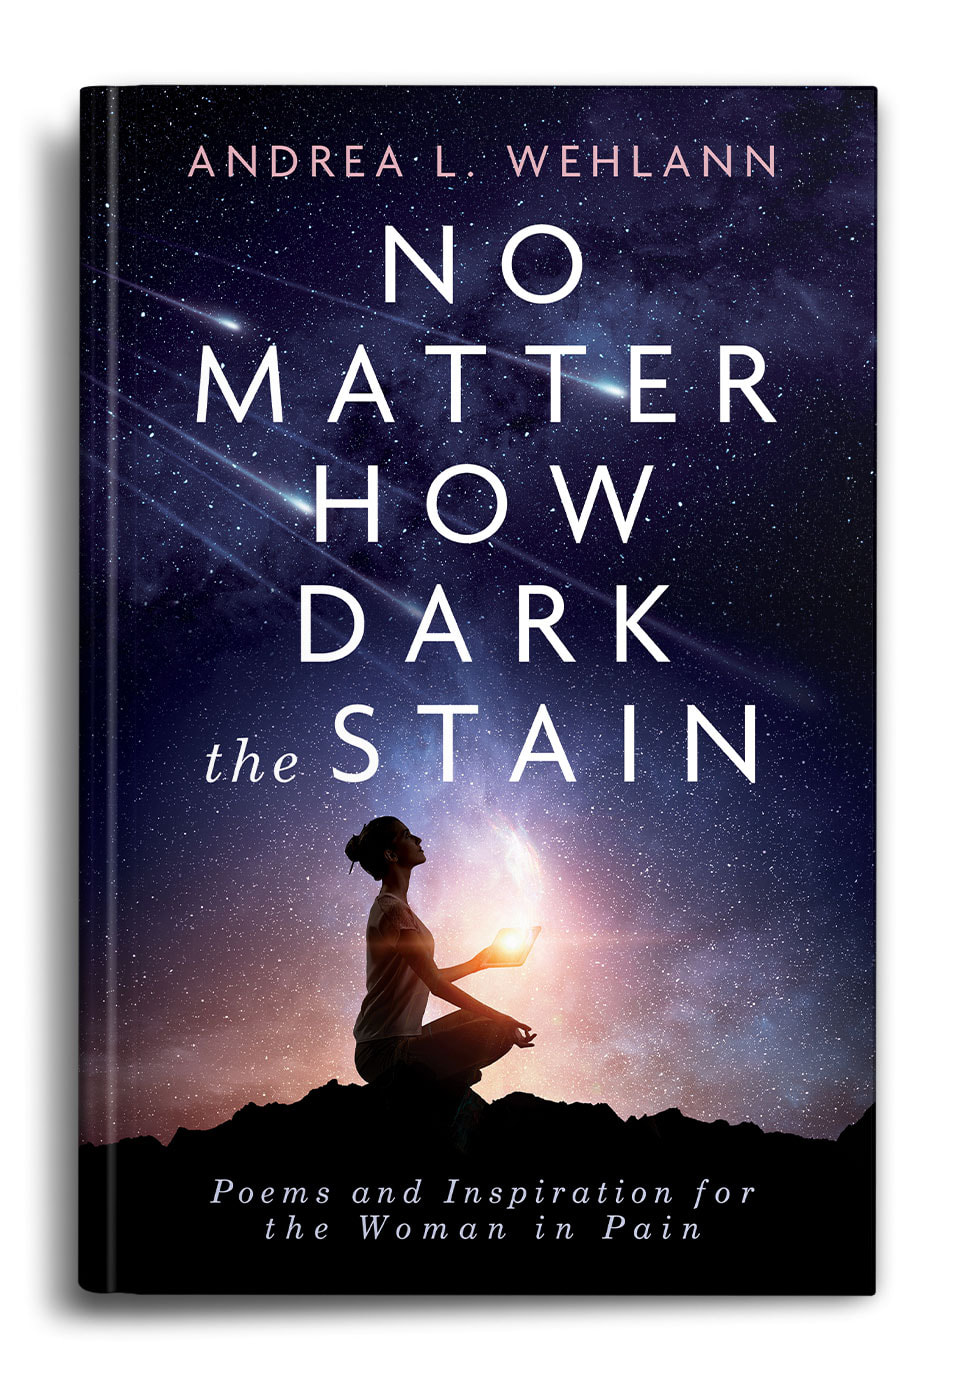 No-Matter-How-Dark-the-Stain-by-Andrea-L-Wehlan